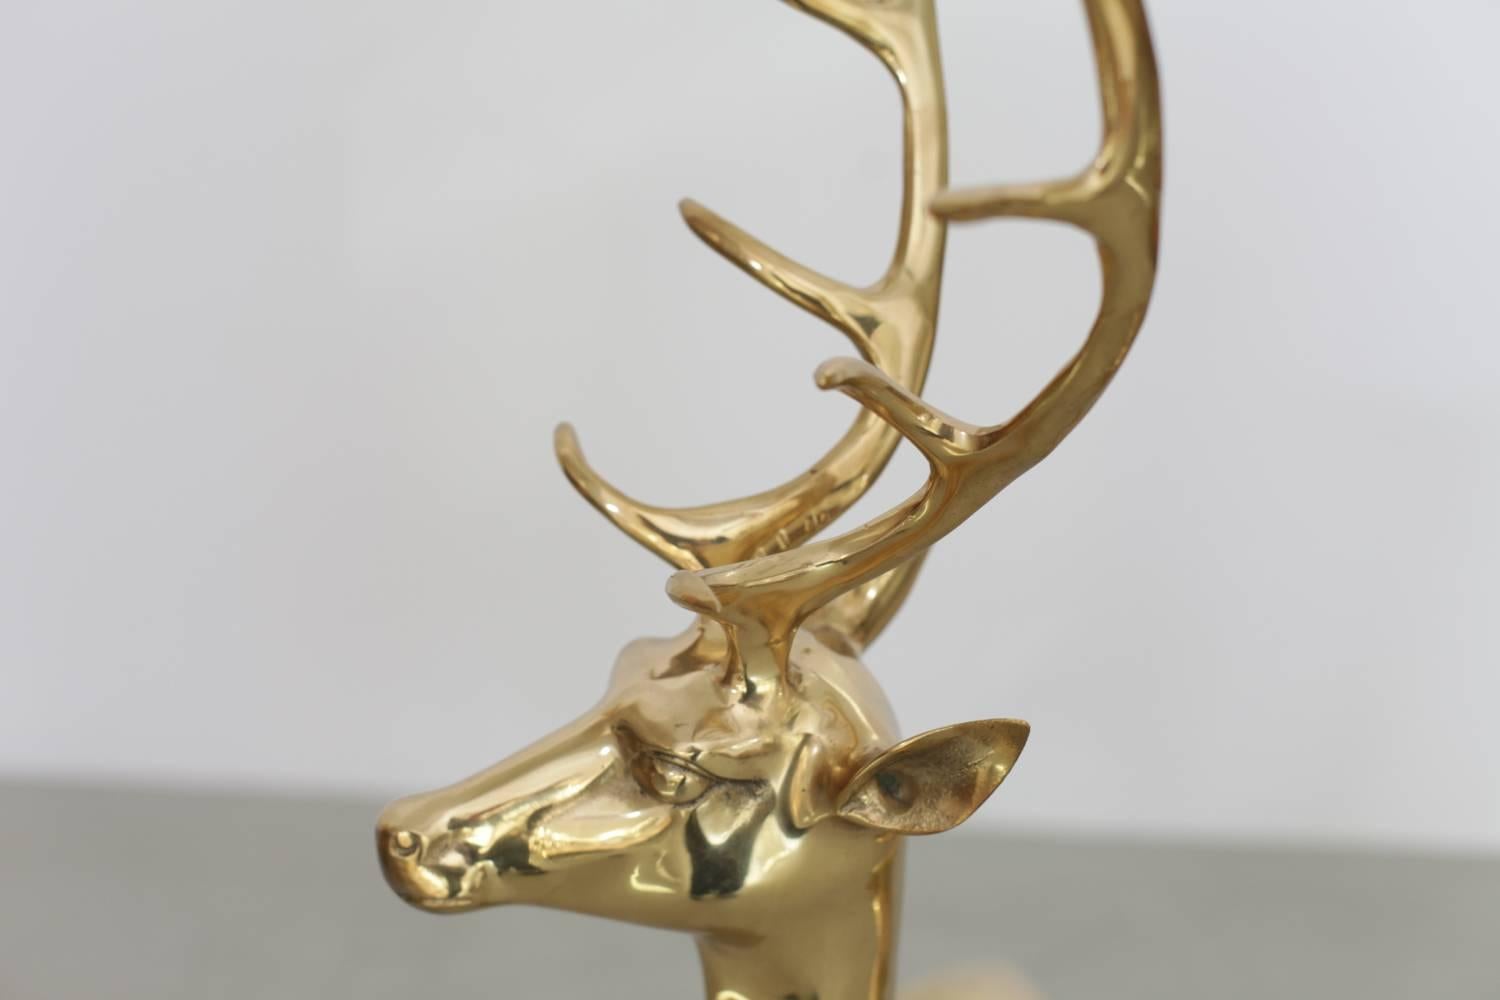 Extraordinary huge set of two deer made of brass. They are in excellent condition and they bring the Hollywood Regency glamour in every room.